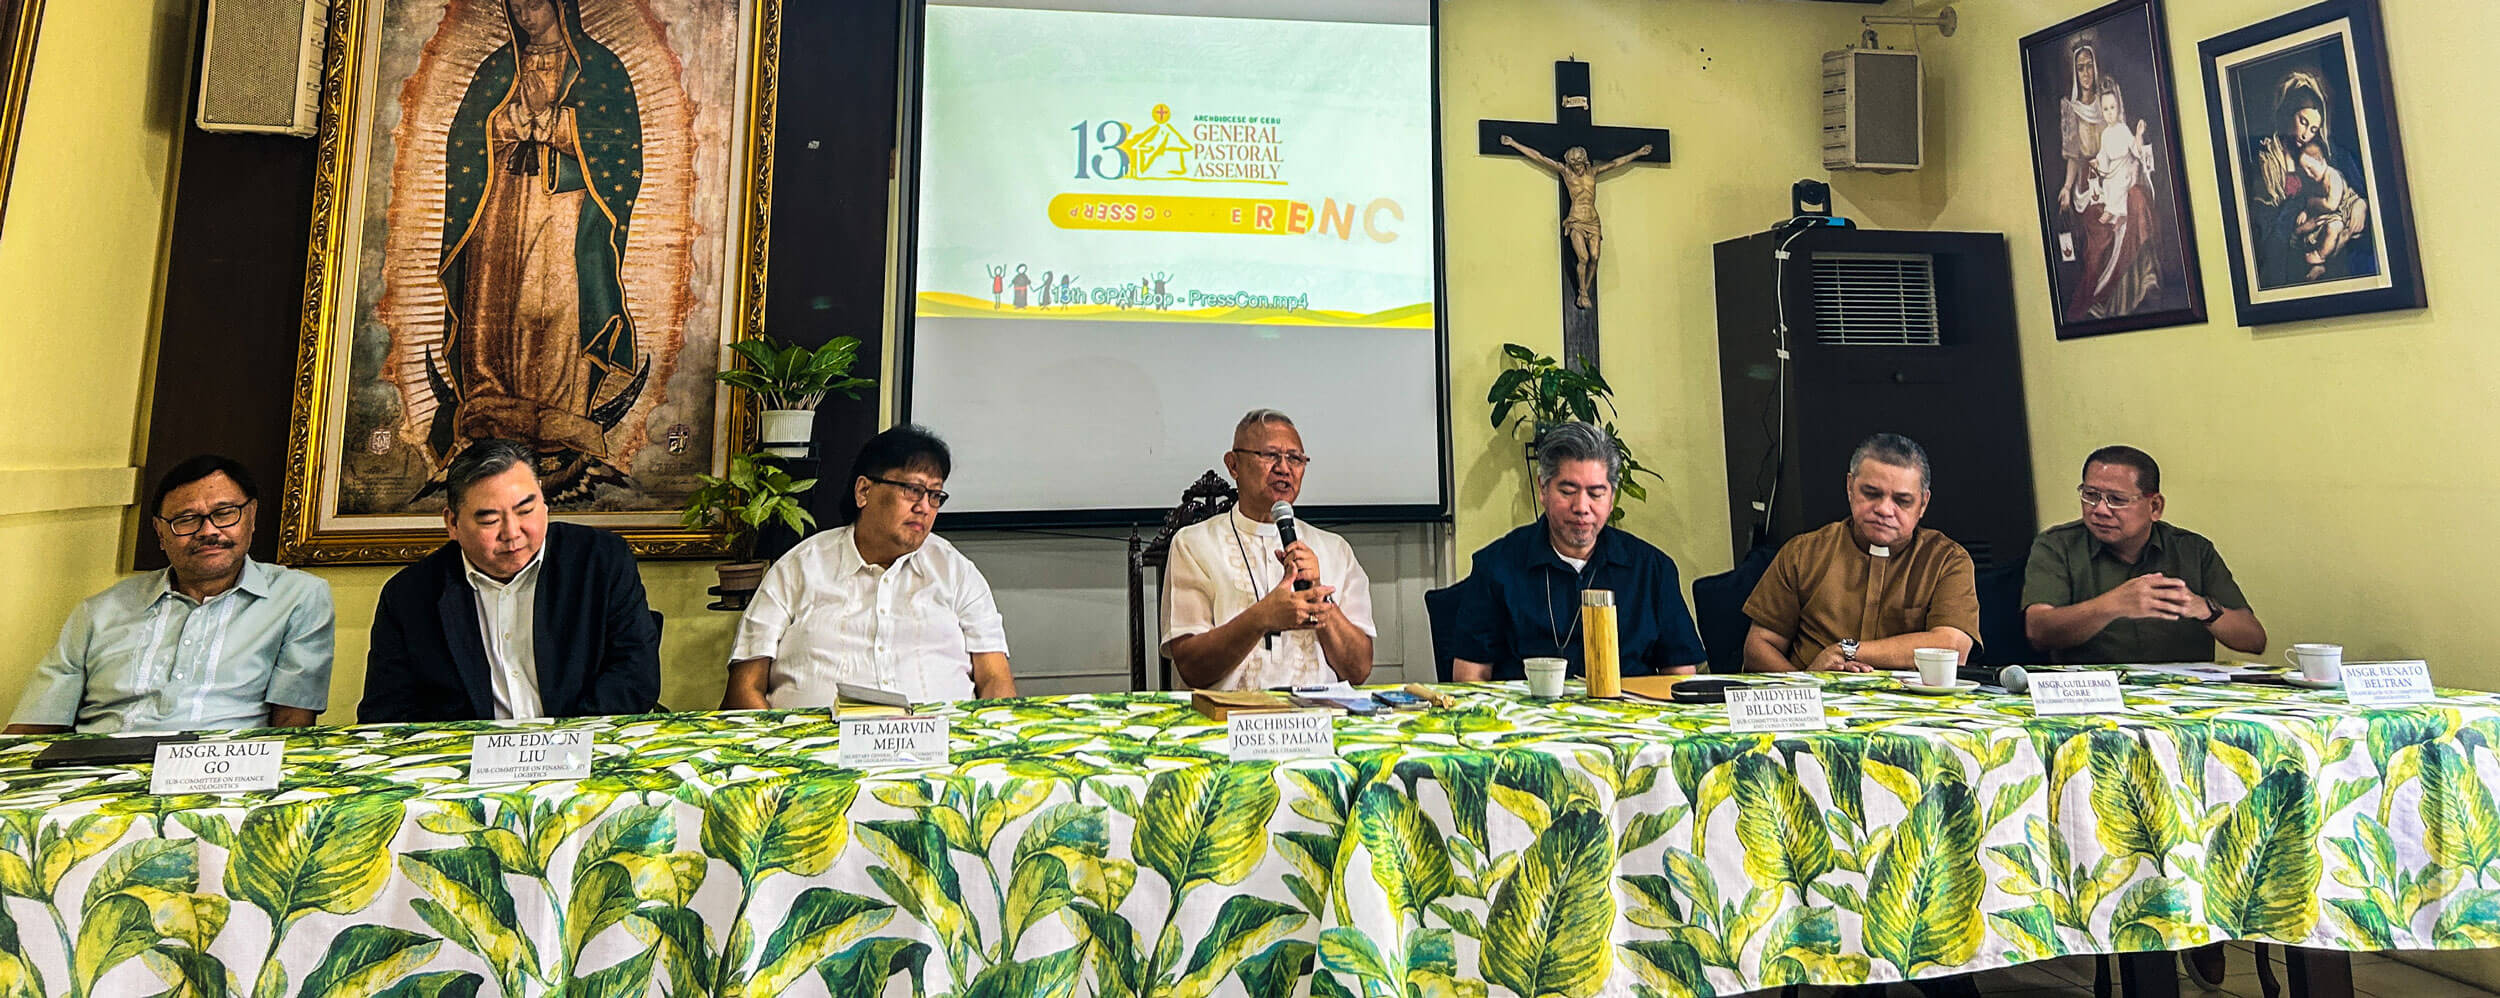 BREAKING UP ARCHDIOCESE. Cebu Archbishop Jose S. Palma (center) updates media on the latest developments on the move to break up the Archdiocese of Cebu. With Palma are (from left) Msgr. Raul Go, businessman Edmun Liu, Fr. Marvin Mejia, Auxiliary Bishop Midyphil Billones, Msgr. Guillermo Gorre, and Msgr. Renato Beltran. The archdiocese held a press conference on Friday, the day after the General Pastoral Assembly on the move to break up the archdiocese closed.